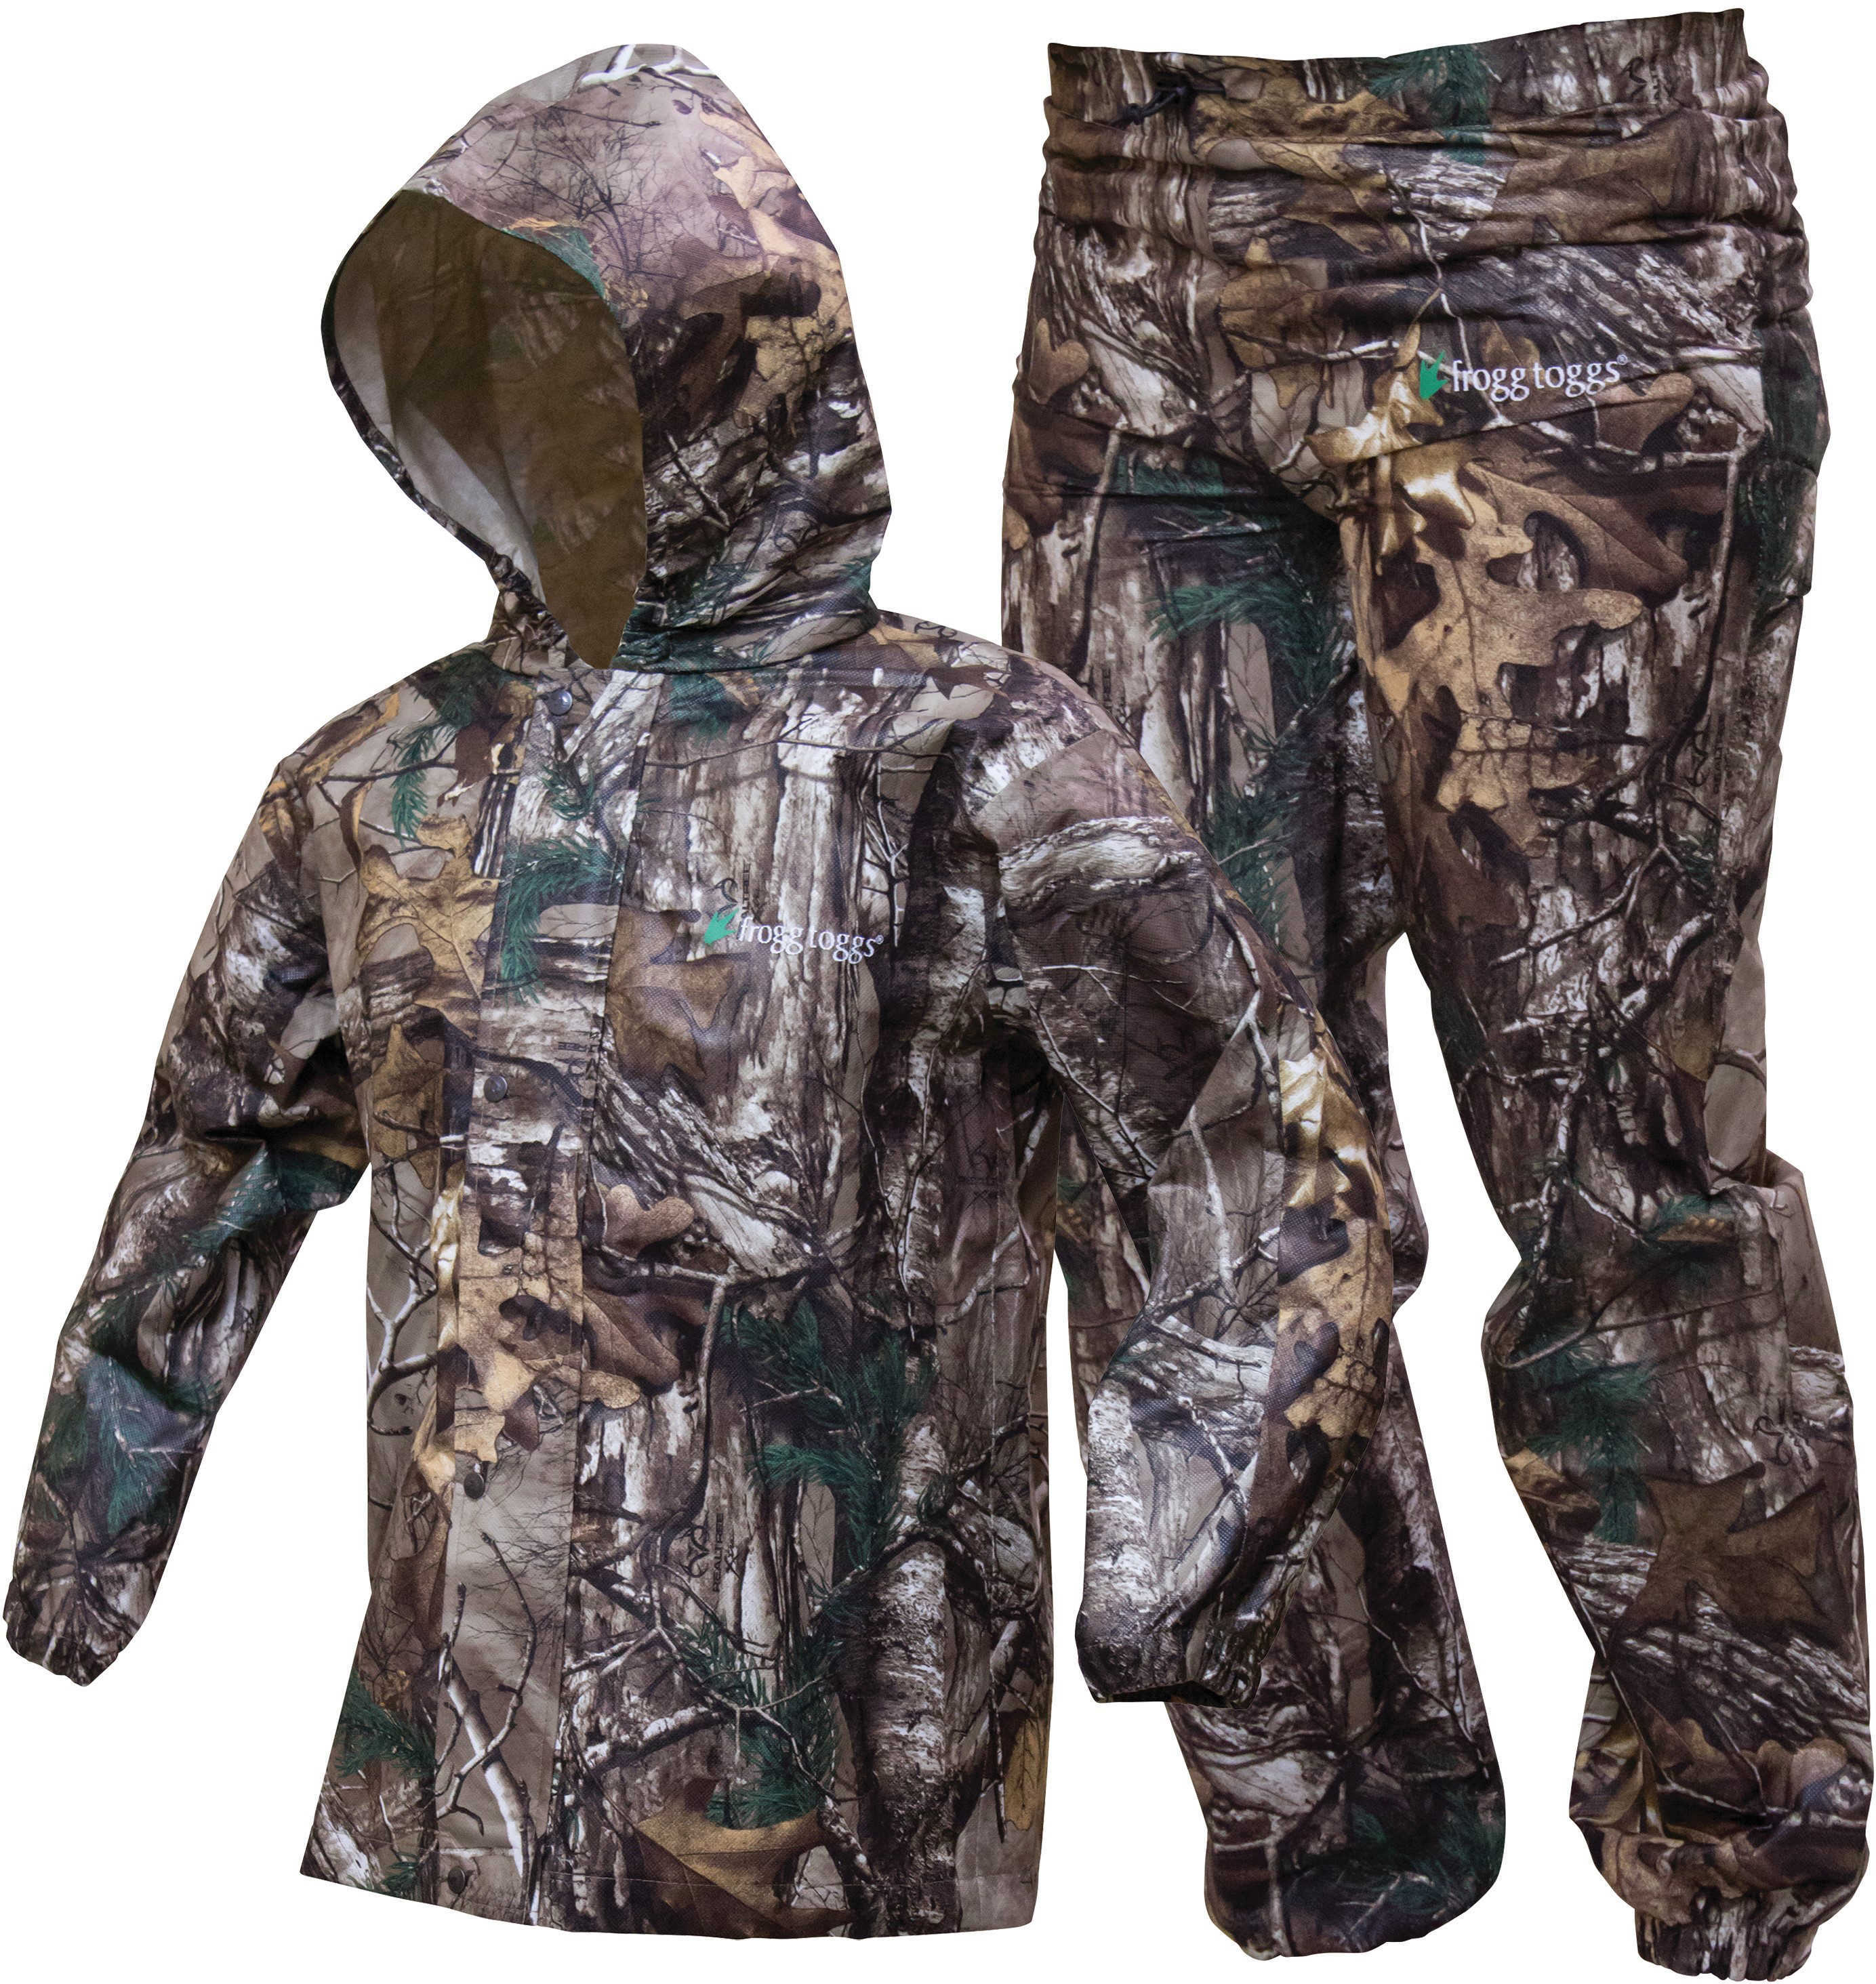 Frogg Toggs Polly Woggs Kids Rain Suit Realtree Xtra, Medium Md: PW6032-54MD